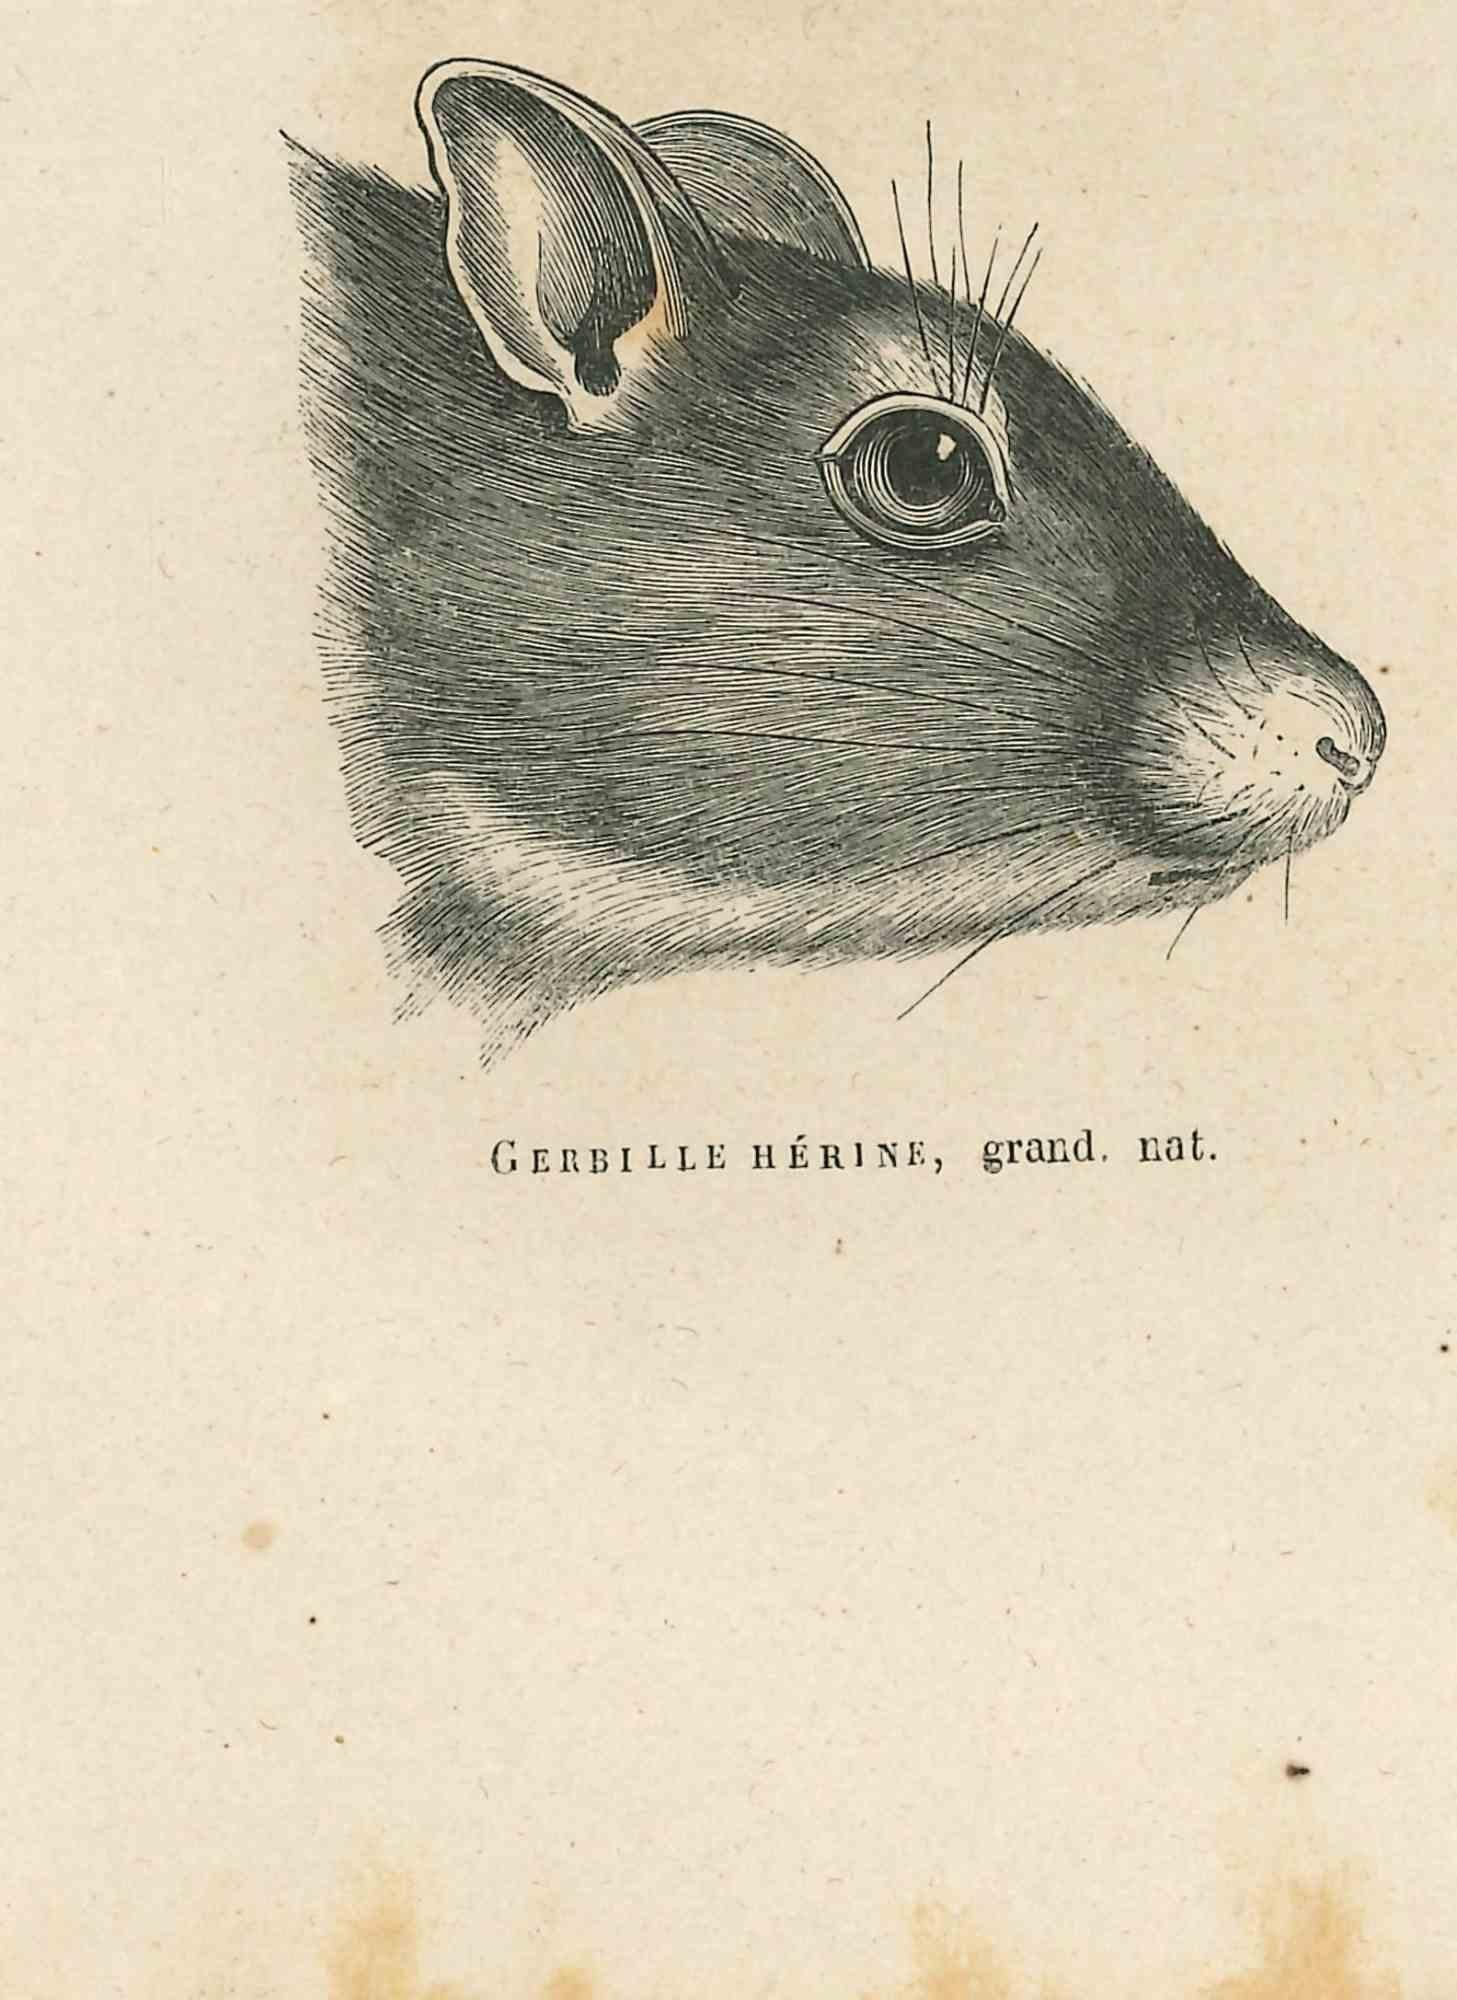 Gerbil is an original lithograph on ivory-colored paper, realized by Paul Gervais (1816-1879). The artwork is from The Series of "Les Trois Règnes de la Nature", and was published in 1854.

Good conditions.

Titled on the lower. With the notes on